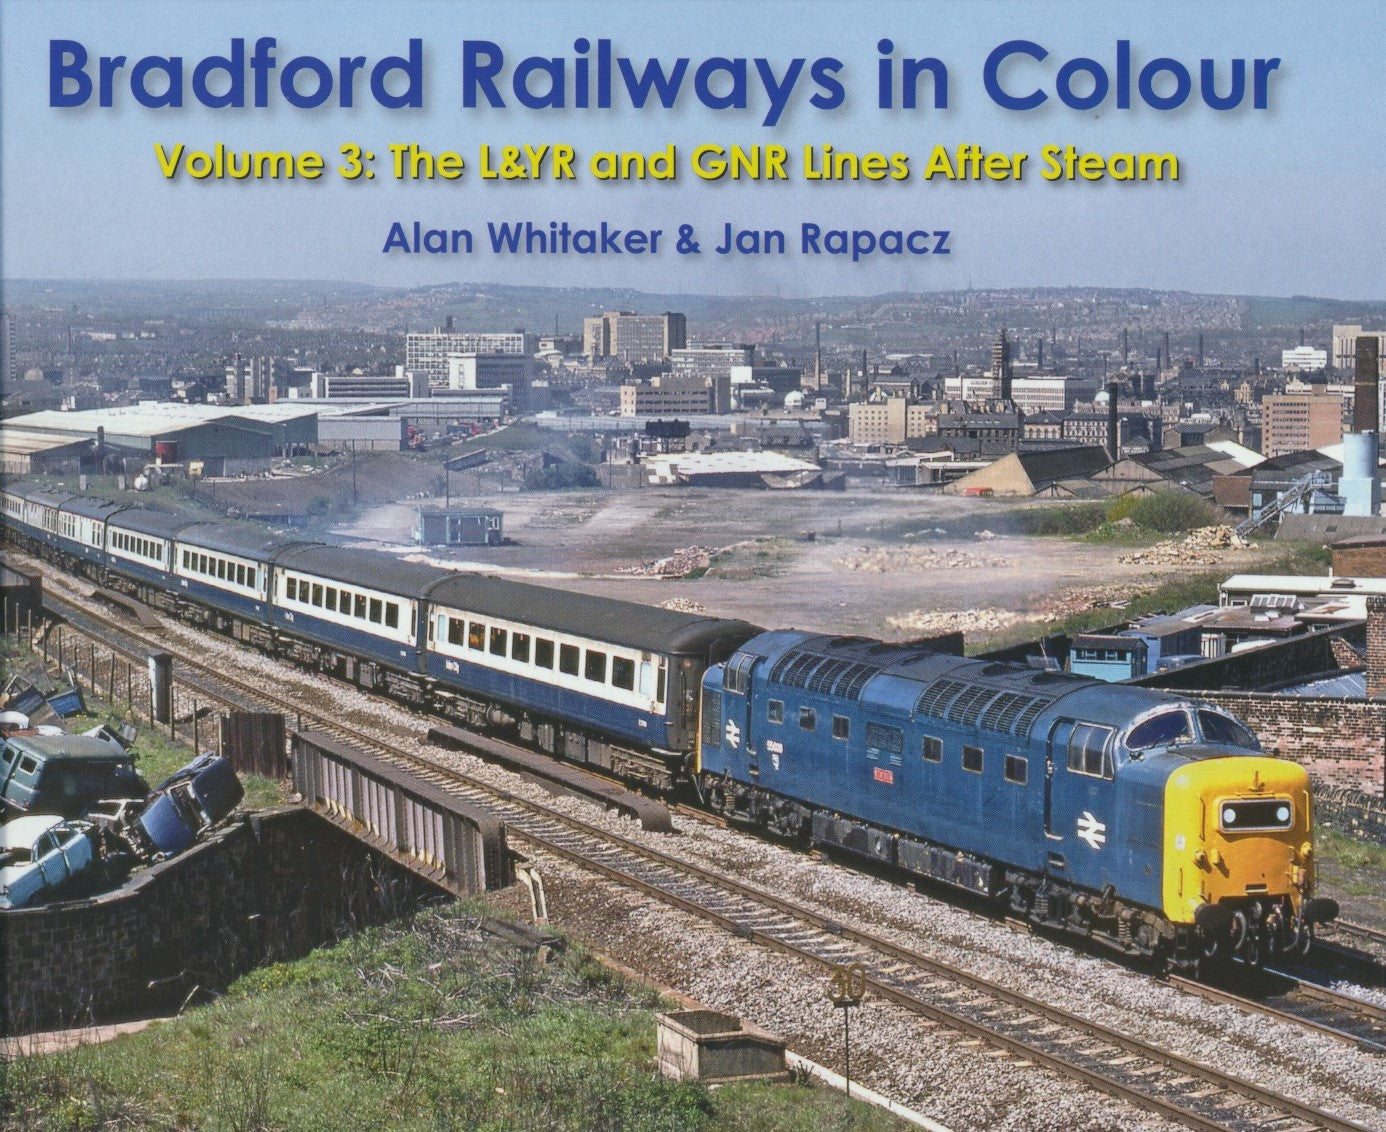 Bradford Railways in Colour Volume 3: The L&YR and GNR Lines After Steam